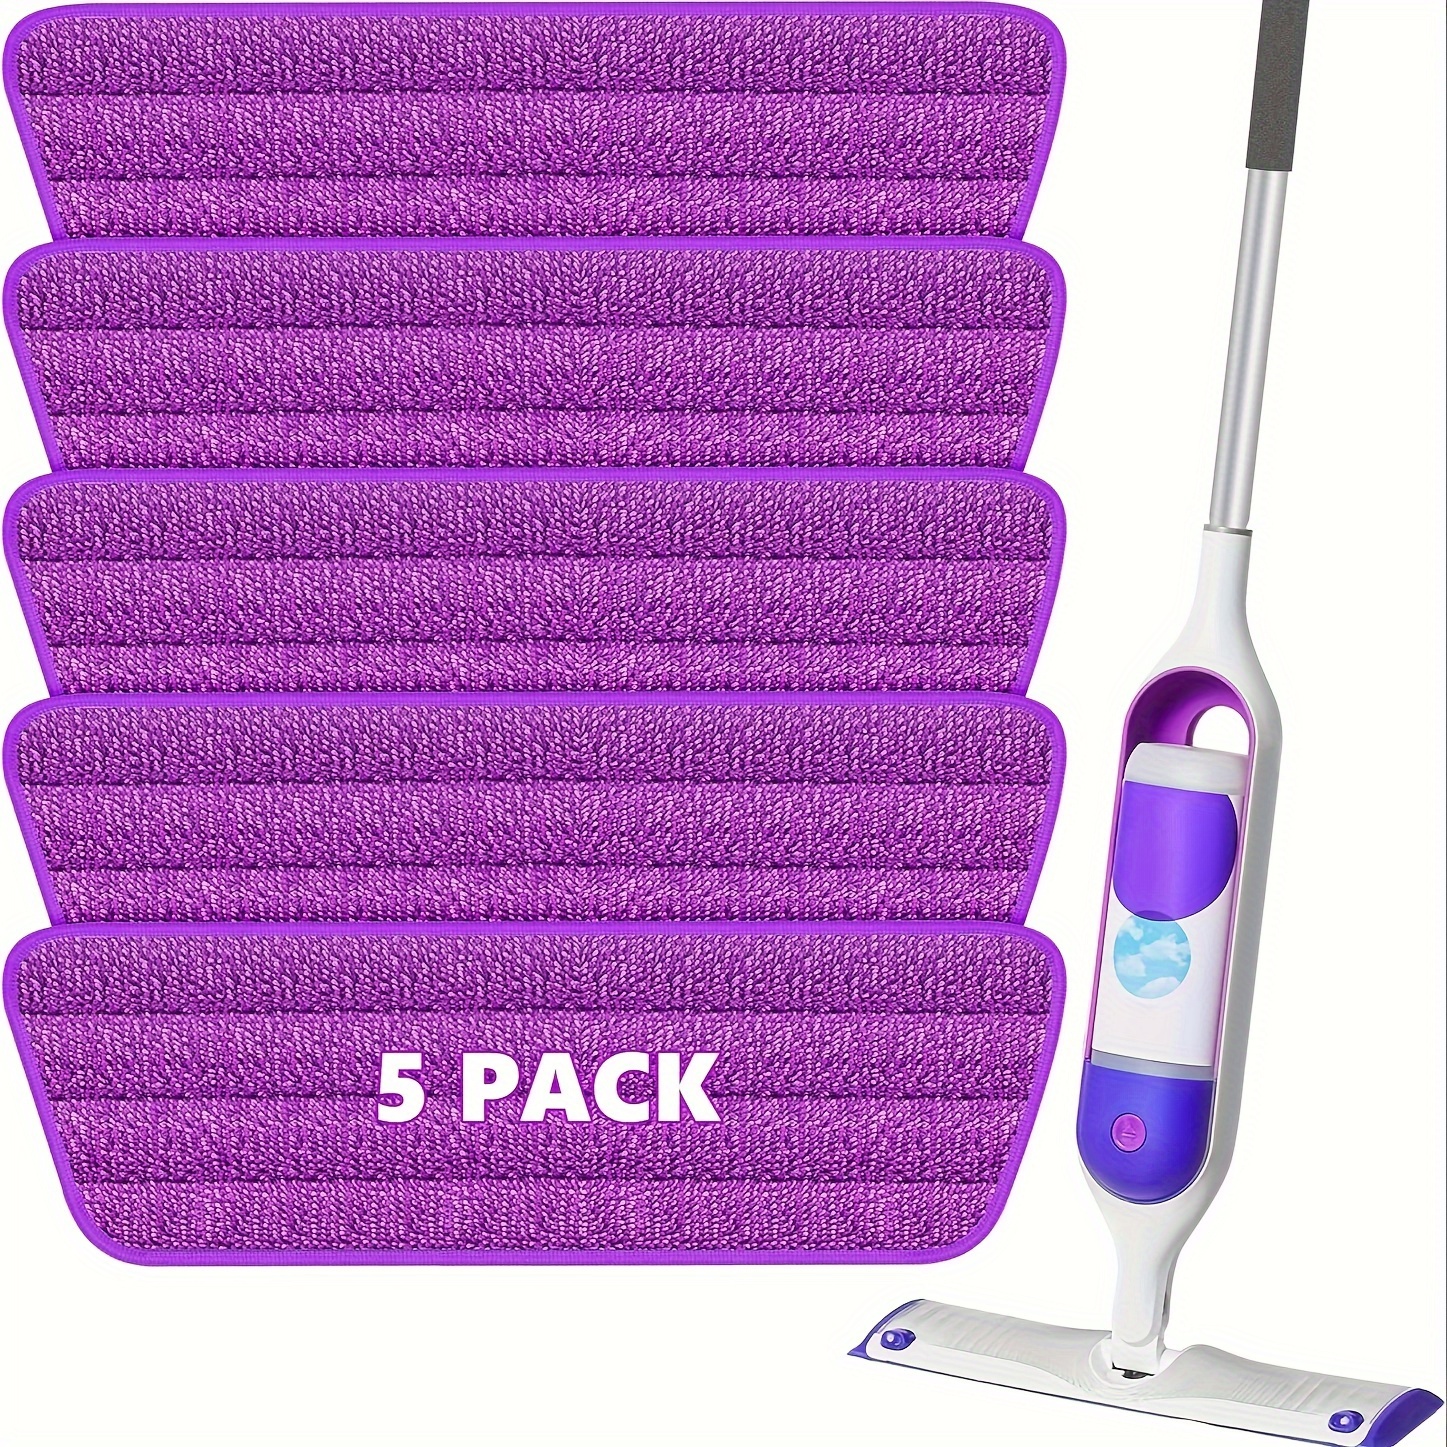 5pcs reusable mop refill pads microfiber power mop refills machine washable power mop pads replacement purple hardwood floor mop cleaning pads 15 3 x 5 1 inch cleaning supplies cleaning accessories